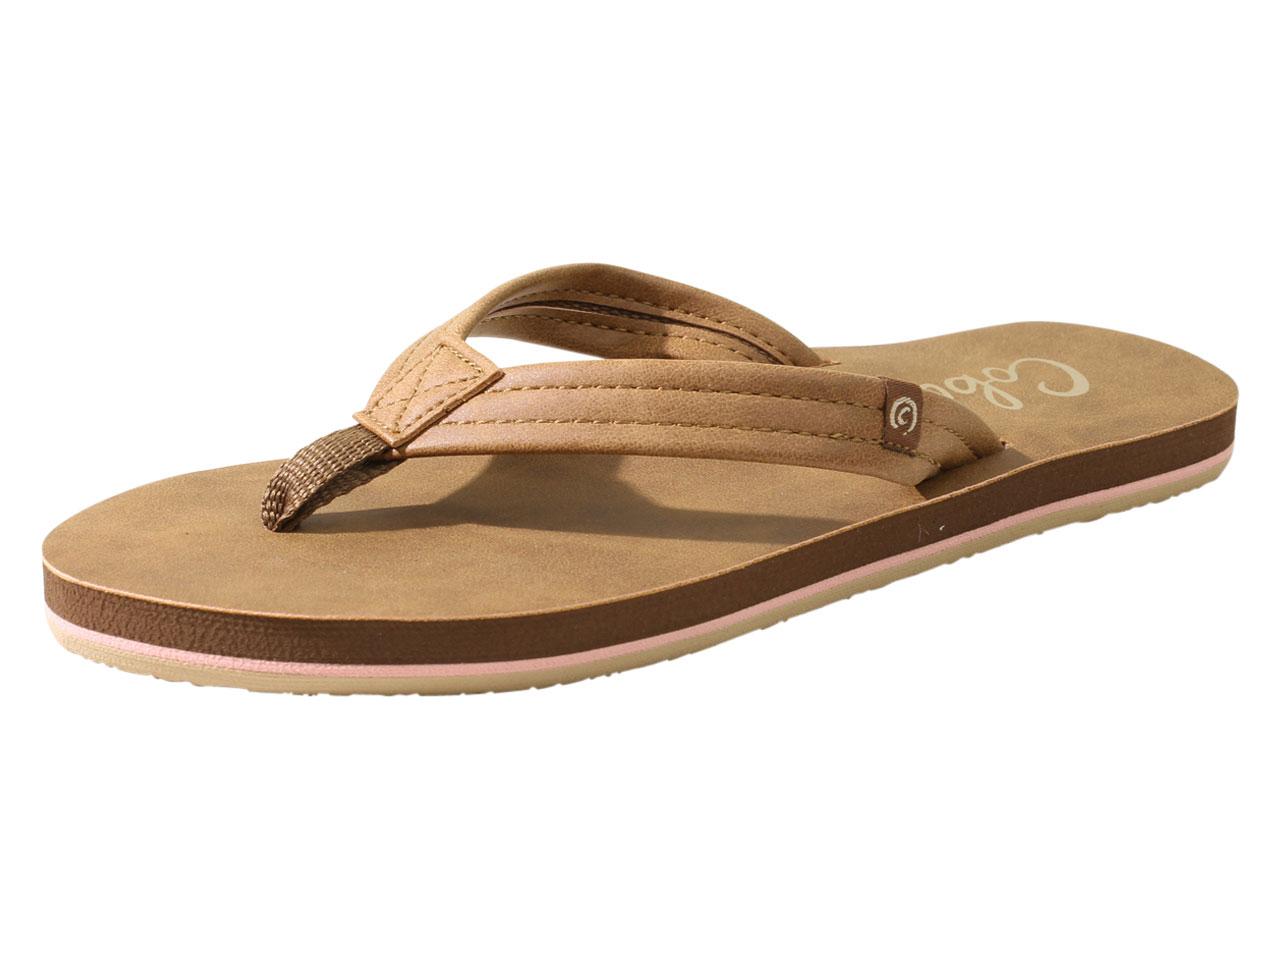 UPC 840207148736 product image for Cobian Women's Pacifica Flip Flops Sandals Shoes | upcitemdb.com